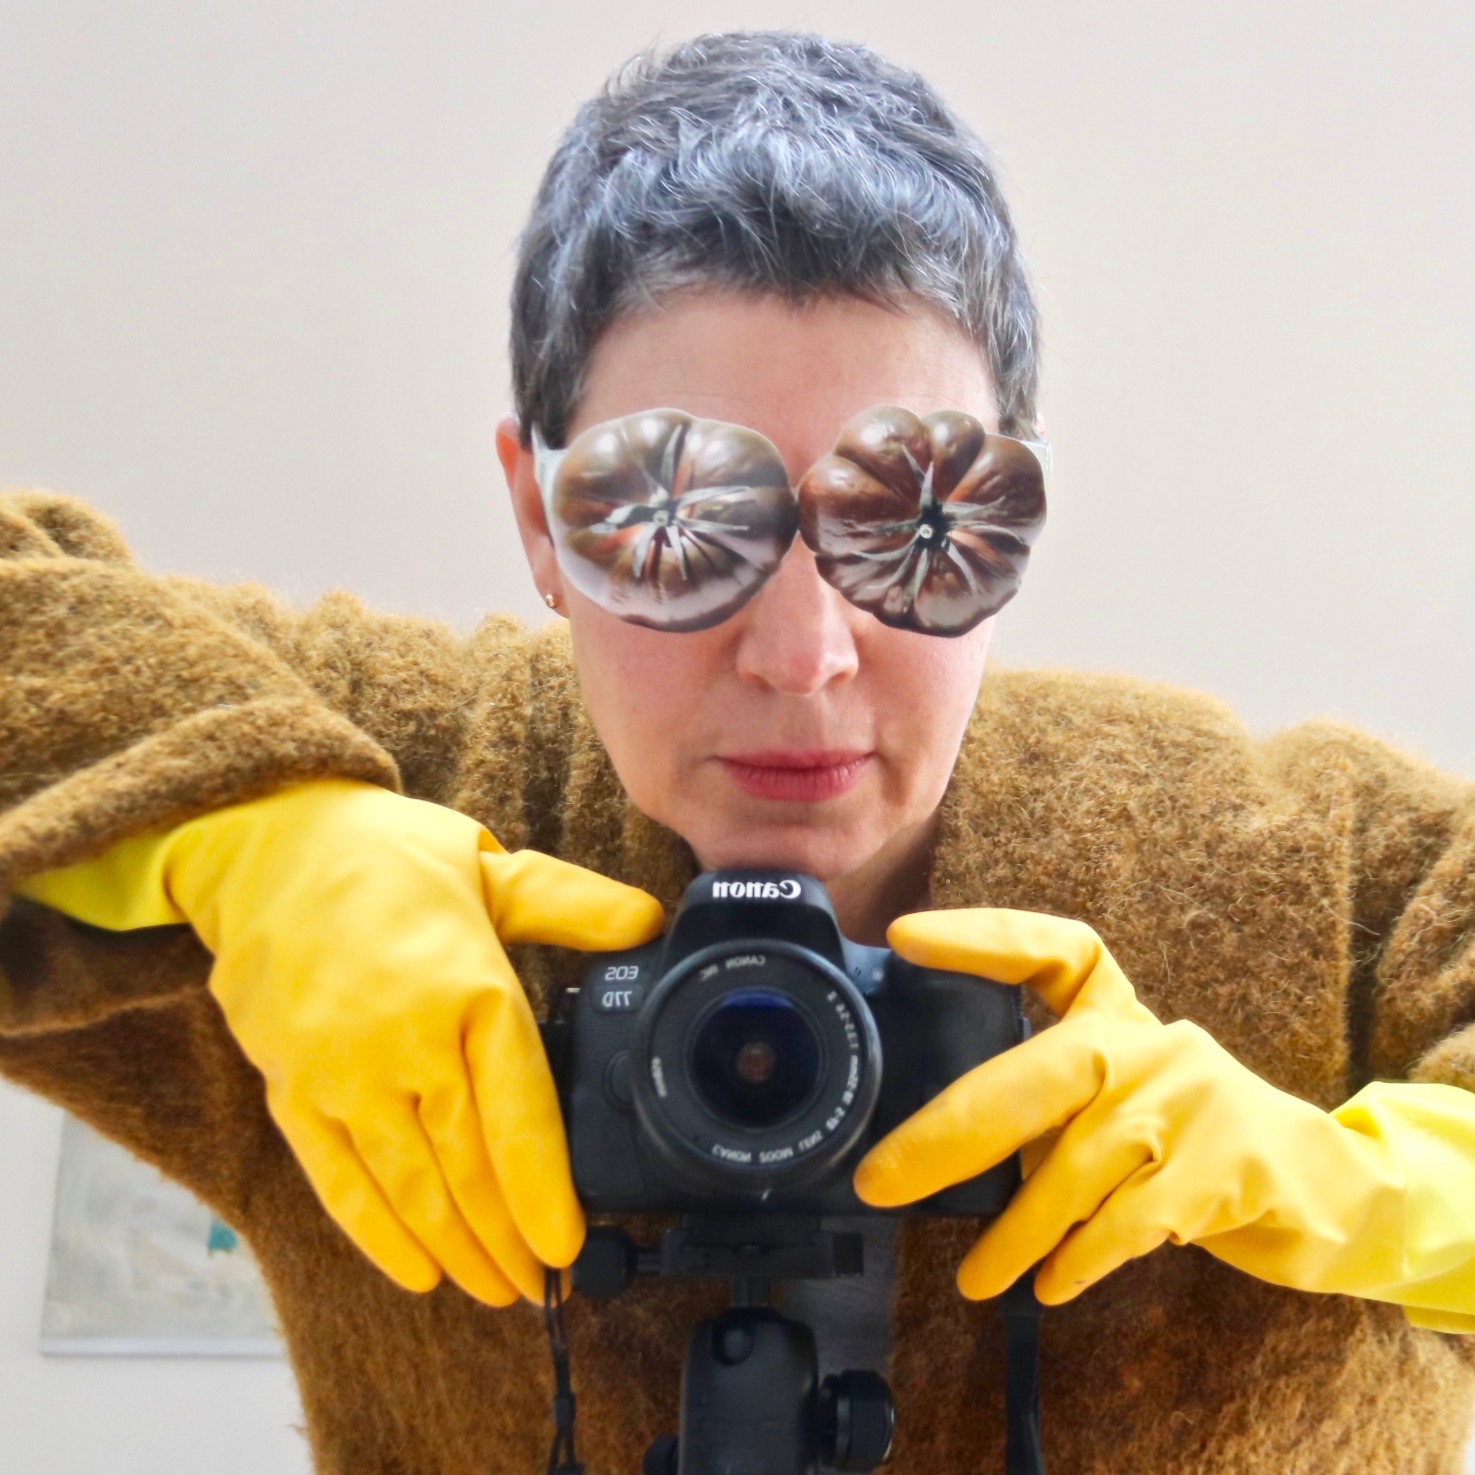 Woman with short dark hair wearing collaged tomato glasses and yellow rubber gloves grips a camera.